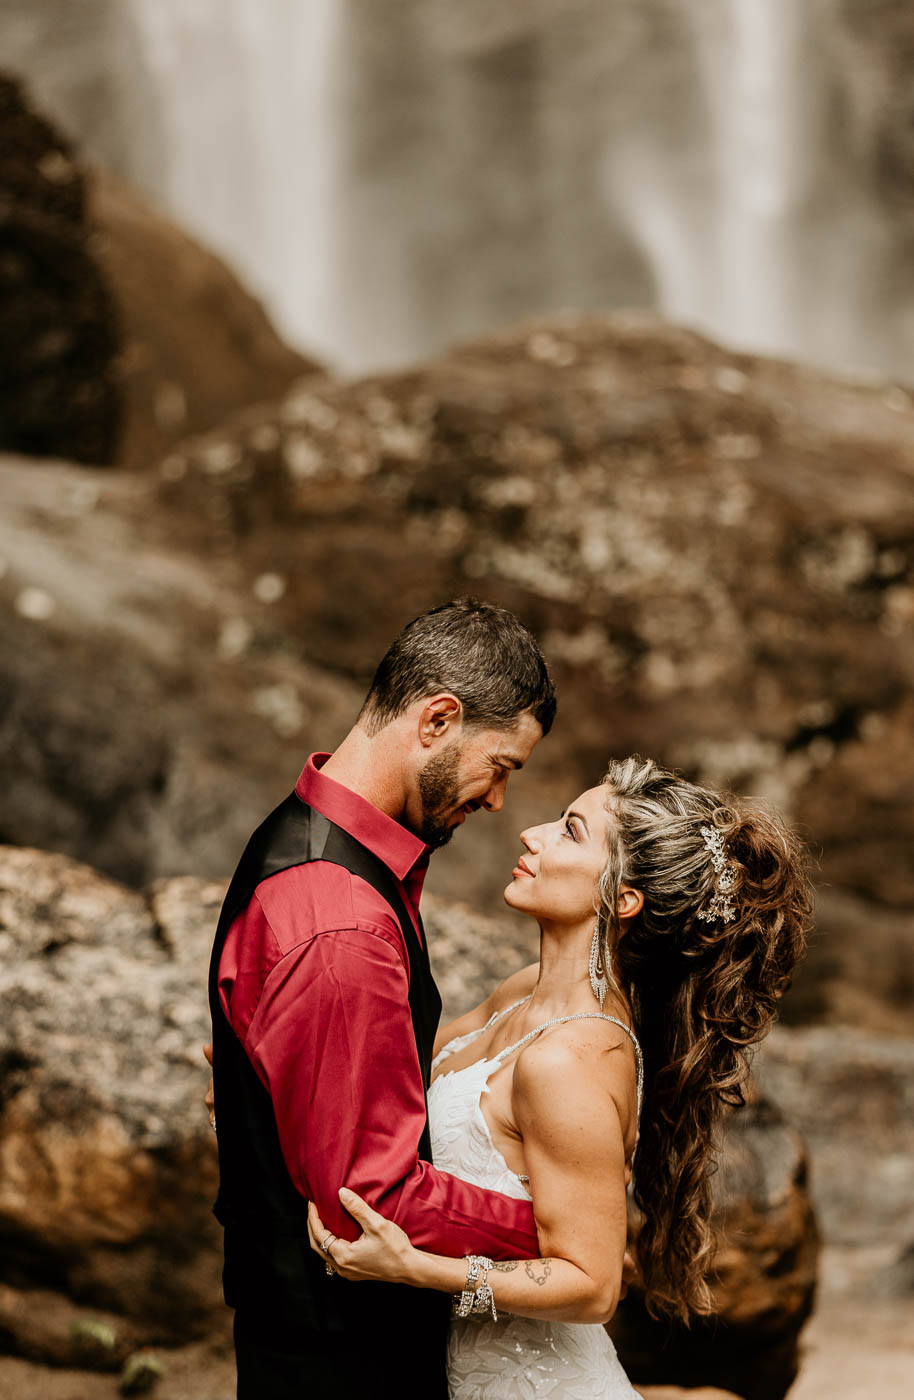 A couple embraces in front of a waterfall. The man is wearing a red shirt with a black vest, and the woman is in a white dress during their georgia elopement location taccoa falls